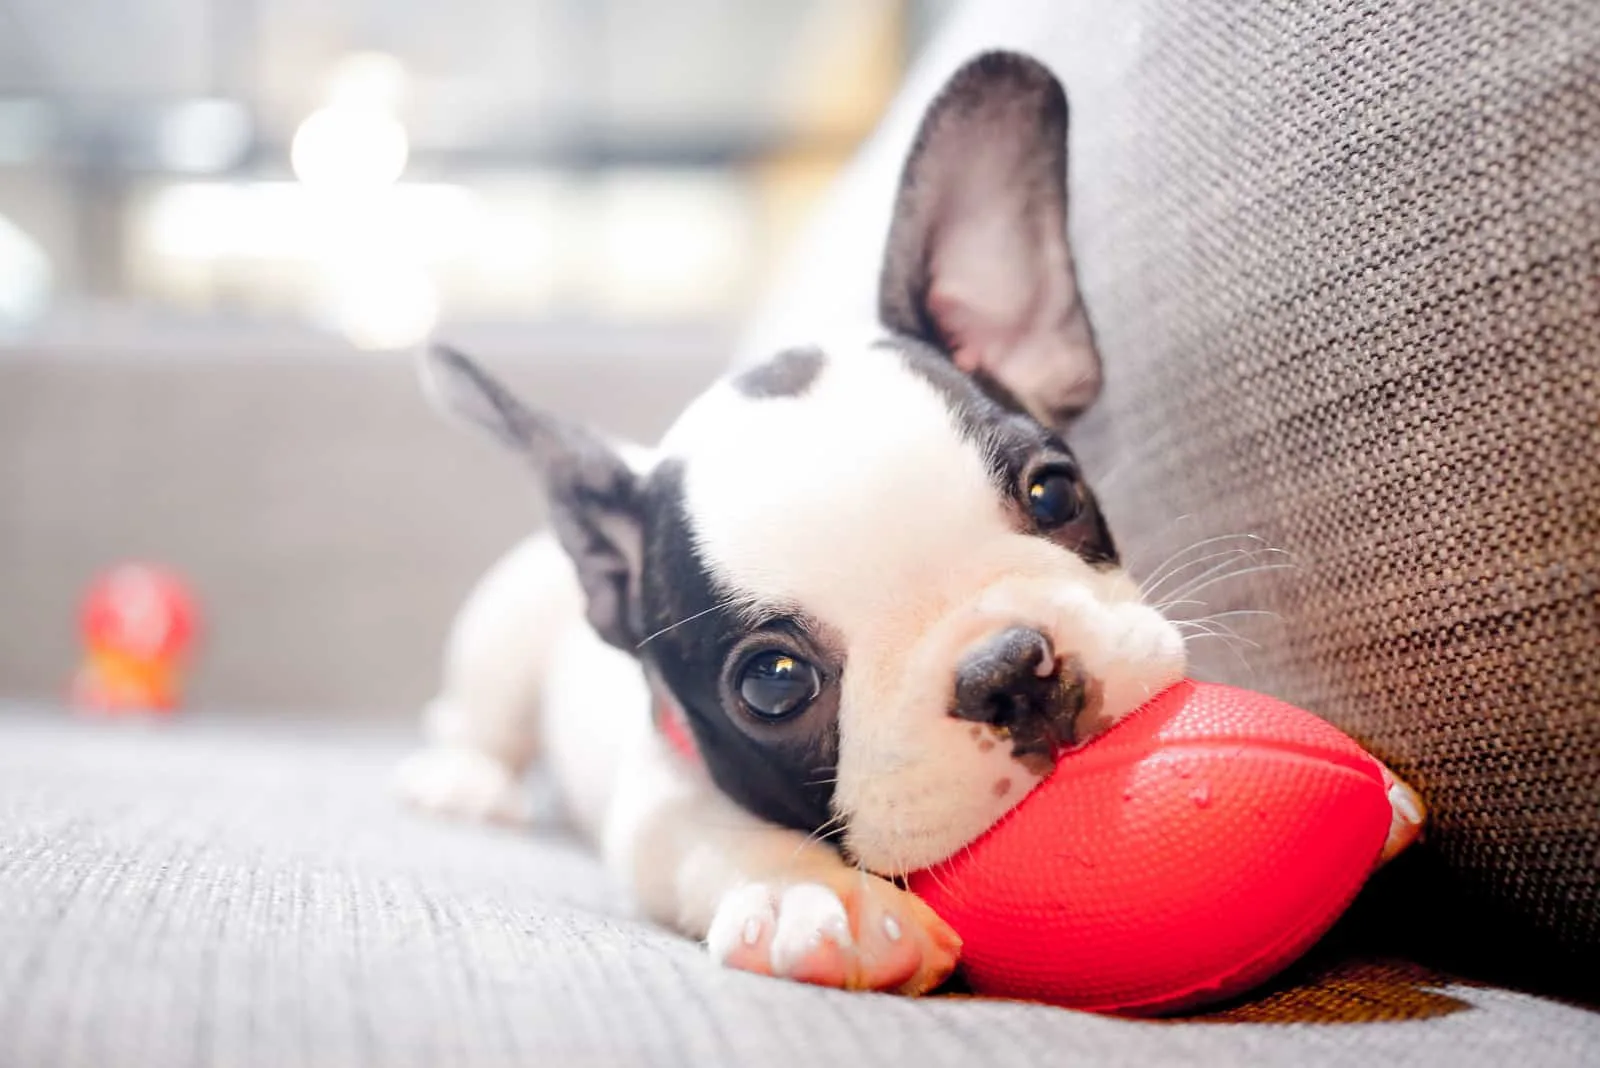 Amanda's Frenchies lies on the couch and plays with the ball